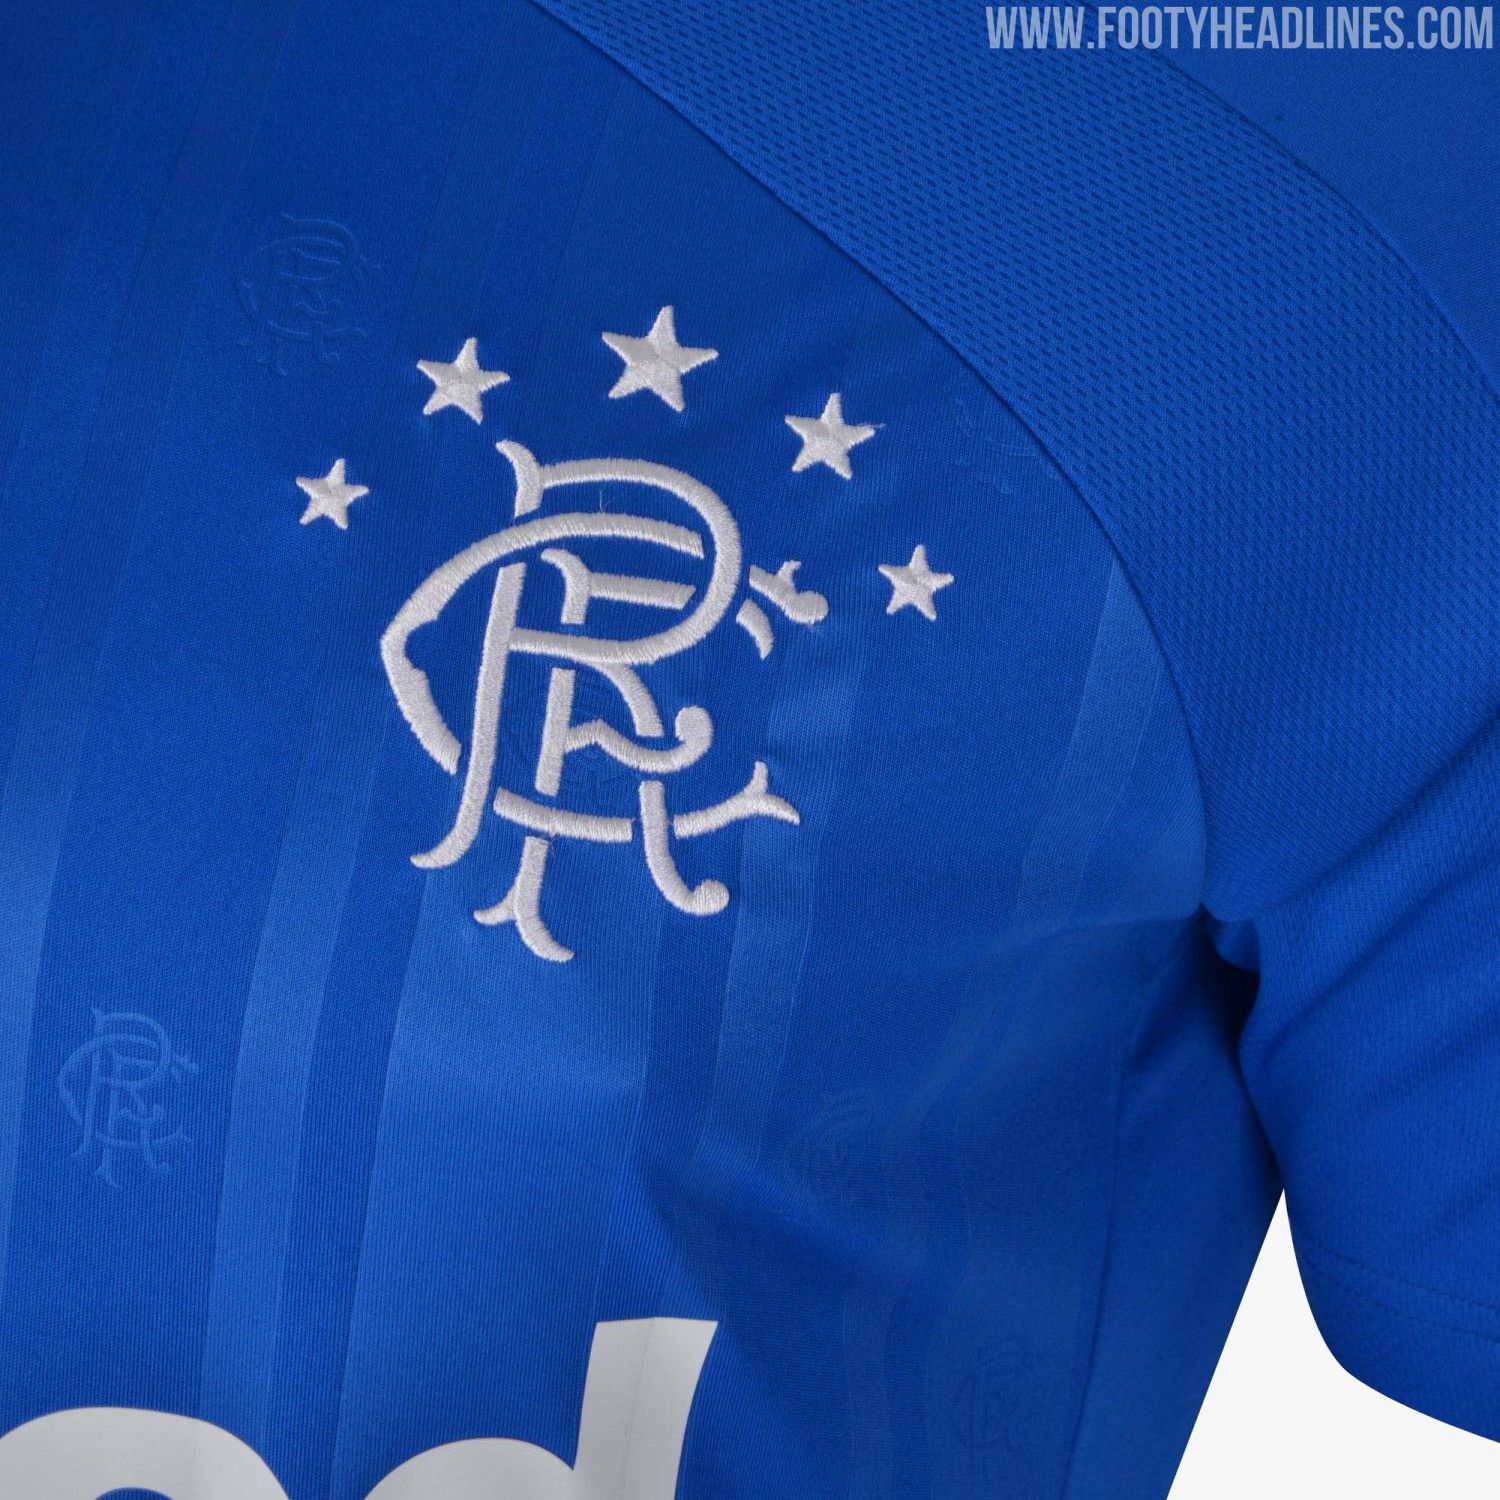 Rangers 2019/20 kits: Leaked images of Gers' new Hummel strips for next  season